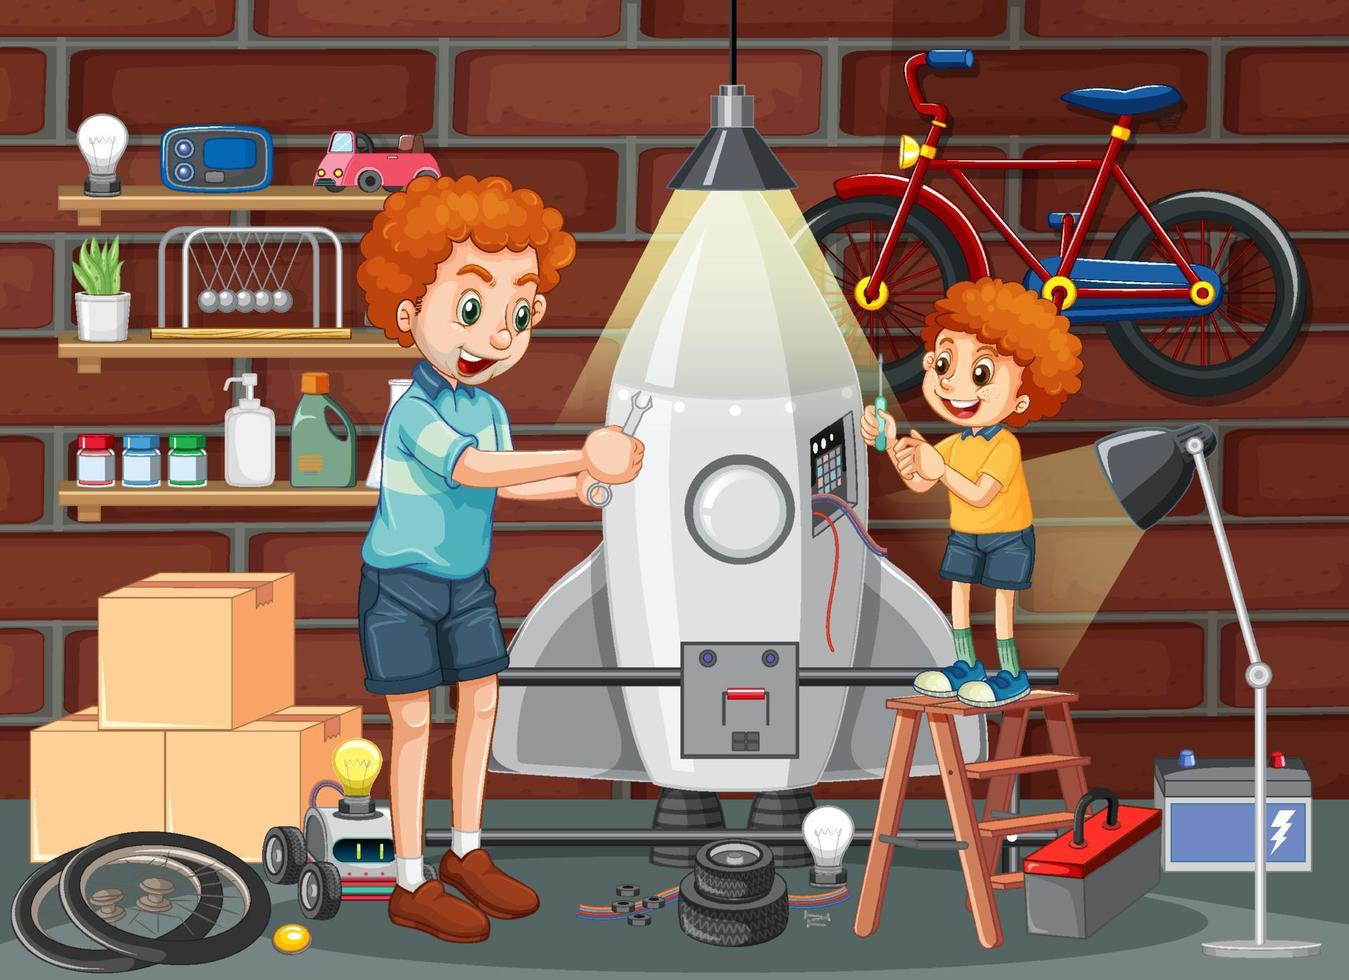 Children fixing a rocket toy together in the room scene vector